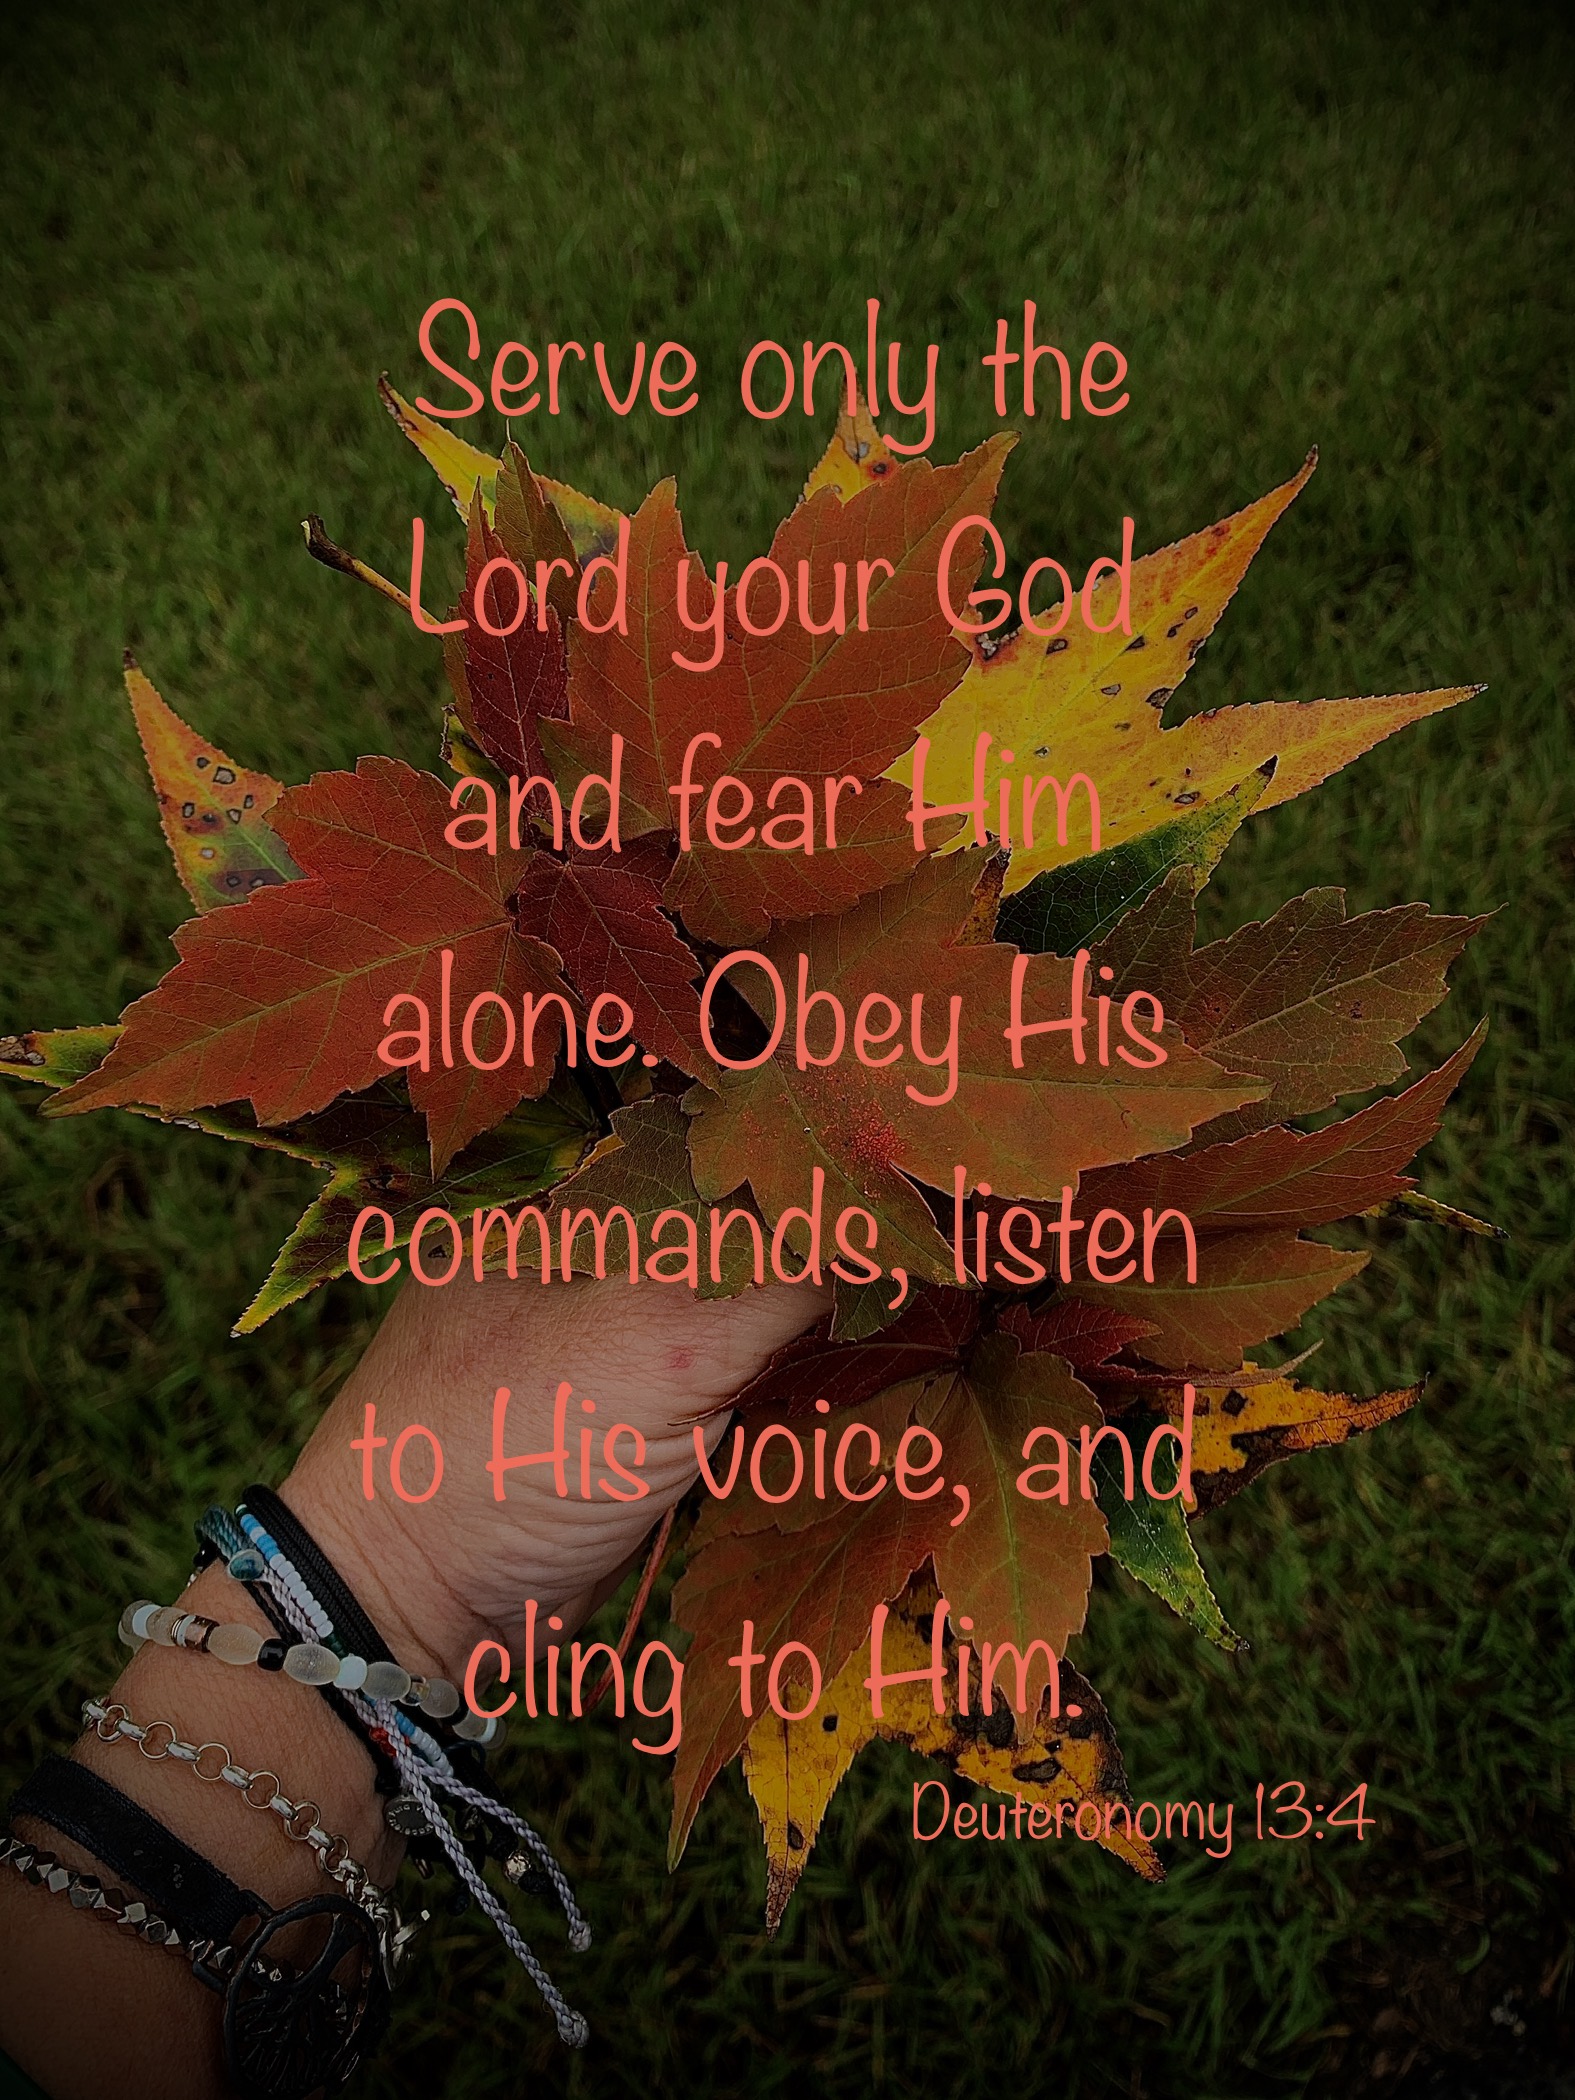 Cling to Him